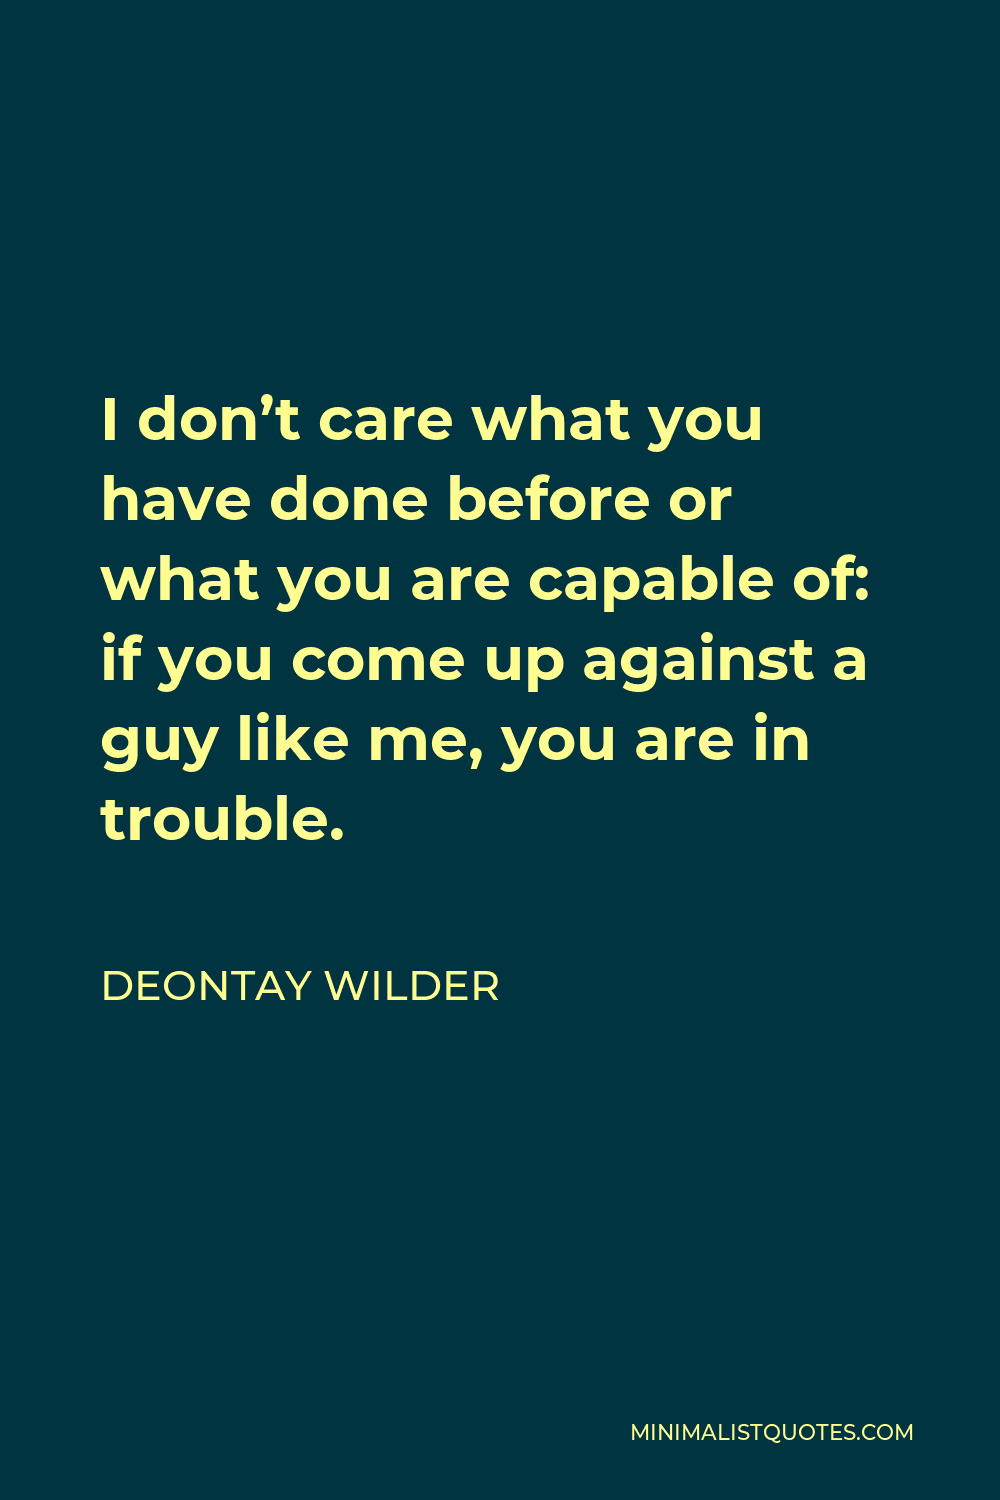 Deontay Wilder Quote - I don’t care what you have done before or what you are capable of: if you come up against a guy like me, you are in trouble.